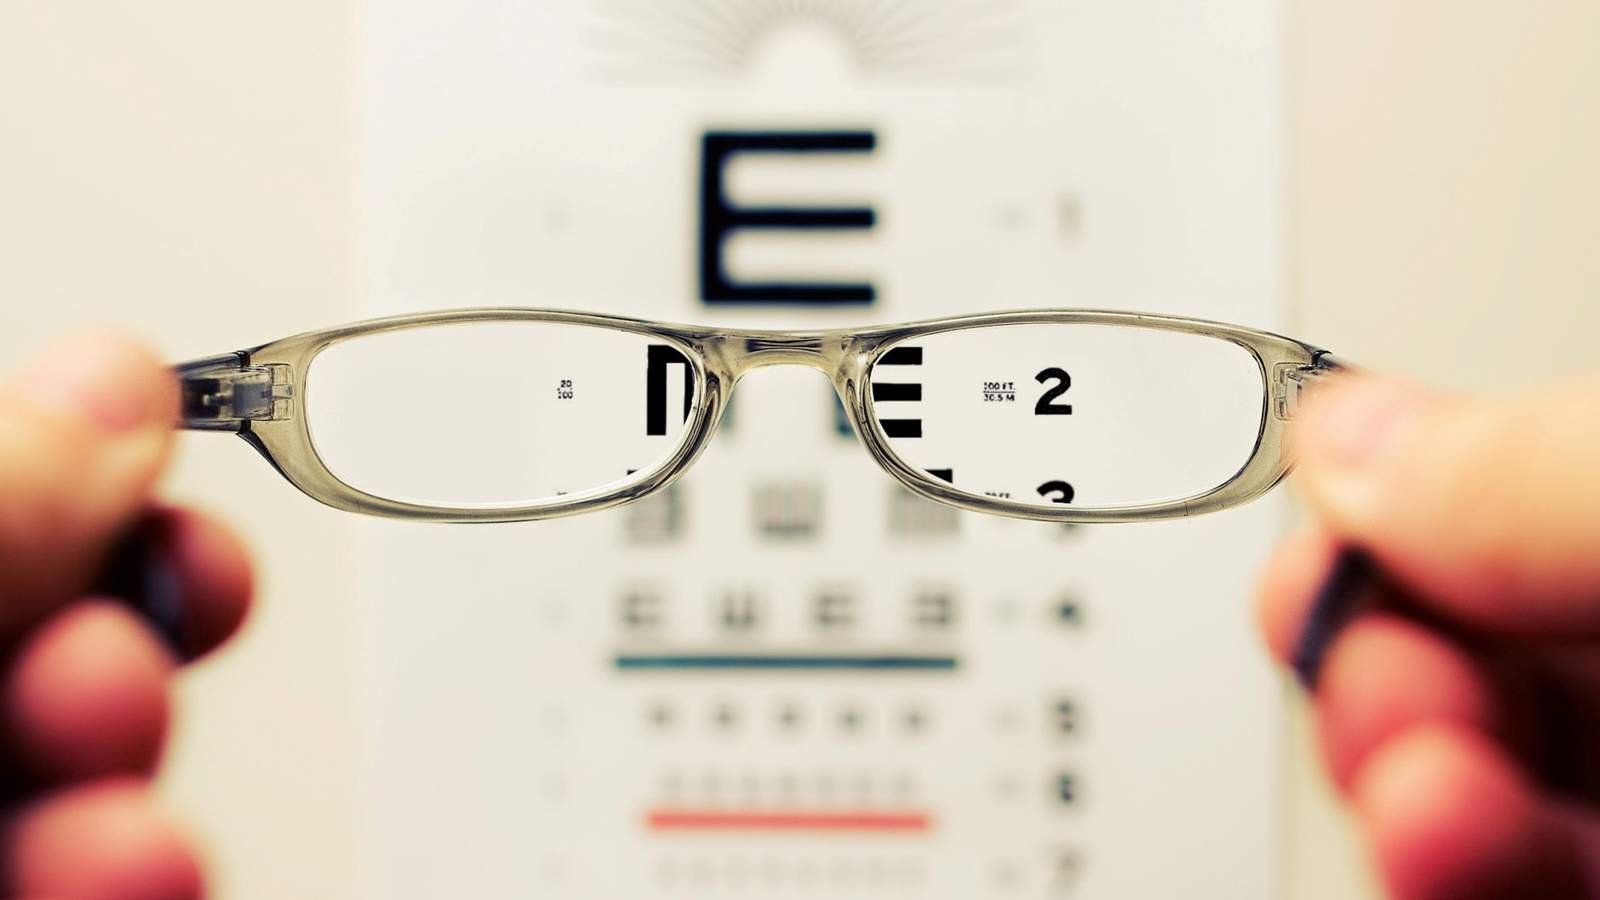 Don’t delay your annual eye exam: ‘Taking care of your eyes is just as important as eating right and exercising’